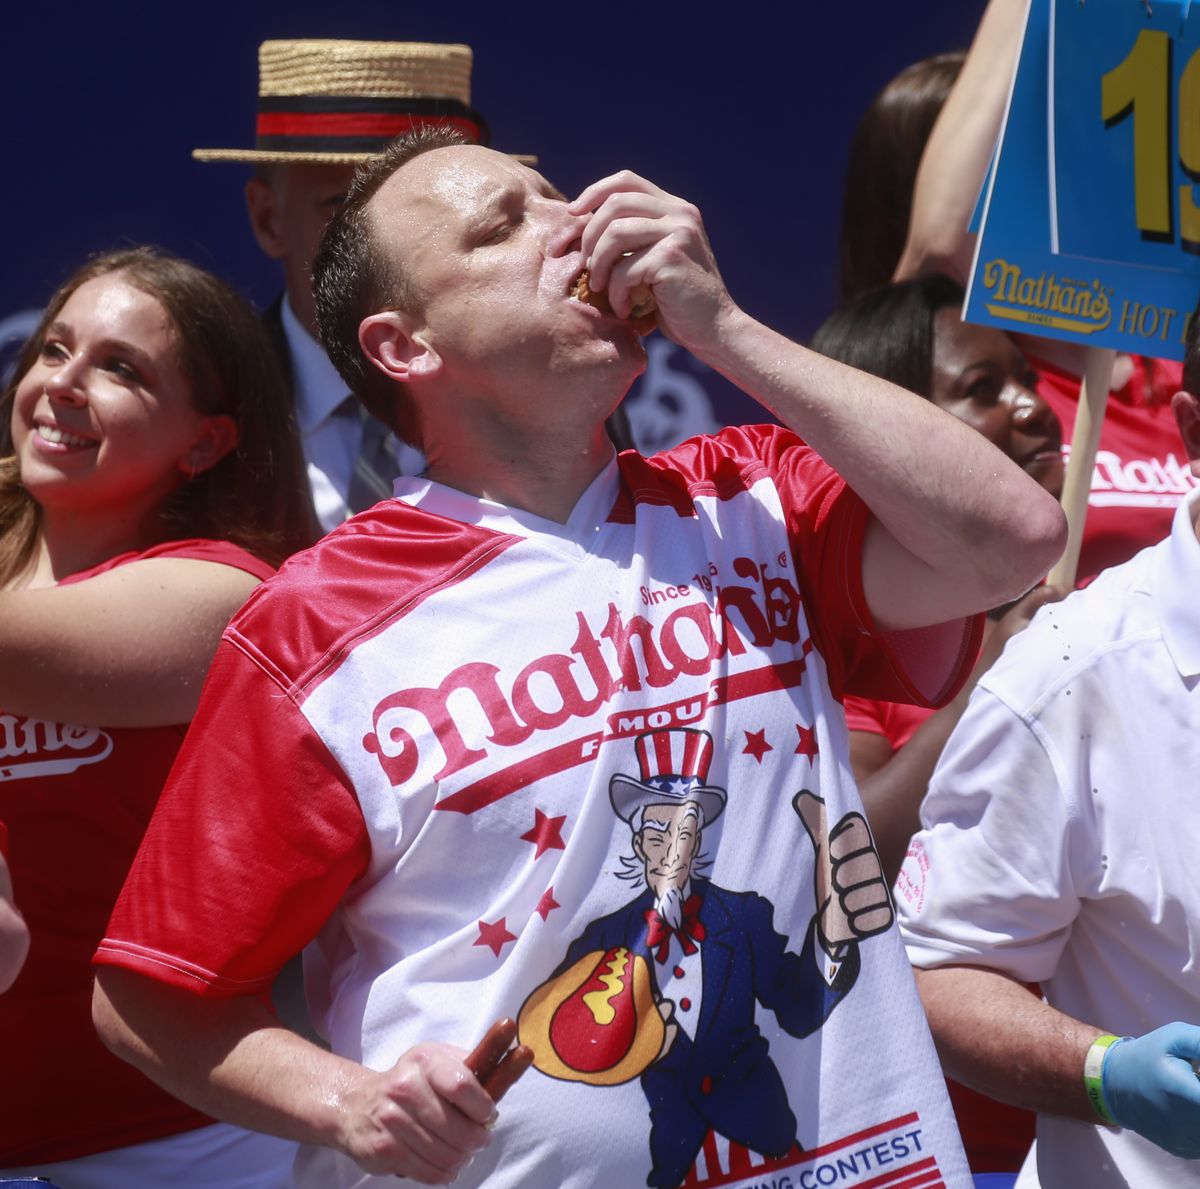 Joey Chestnut's Net Worth Proves Eating Hot Dogs Pays Off